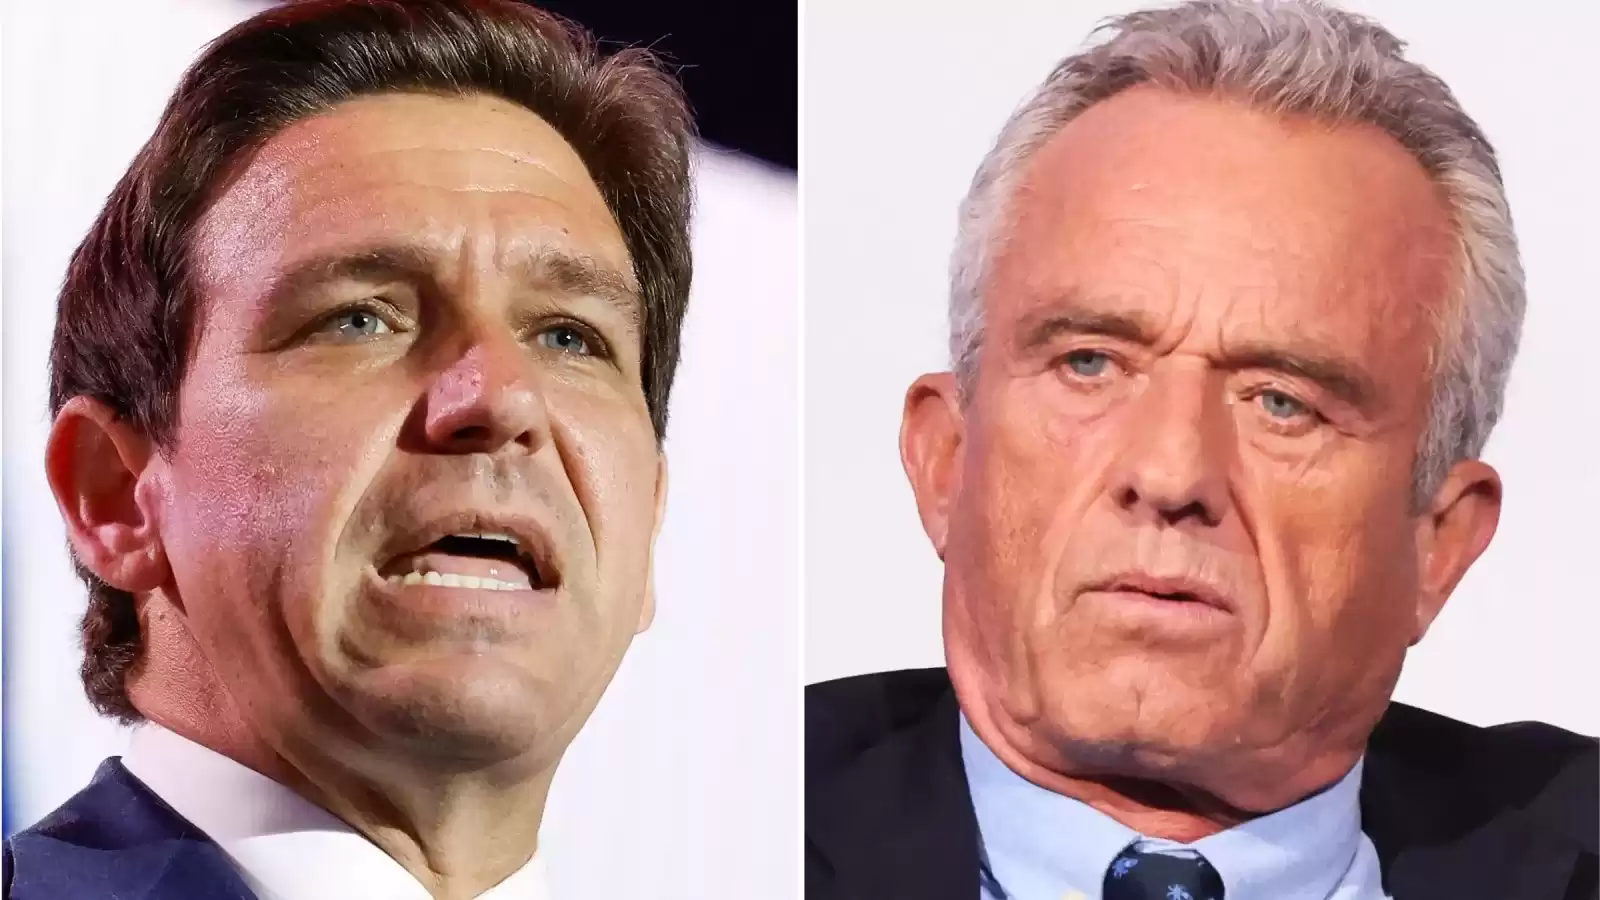 "Breaking News: Ron DeSantis Extends Astonishing Offer to Robert F. Kennedy Jr. - You Won't Believe What It Is!"